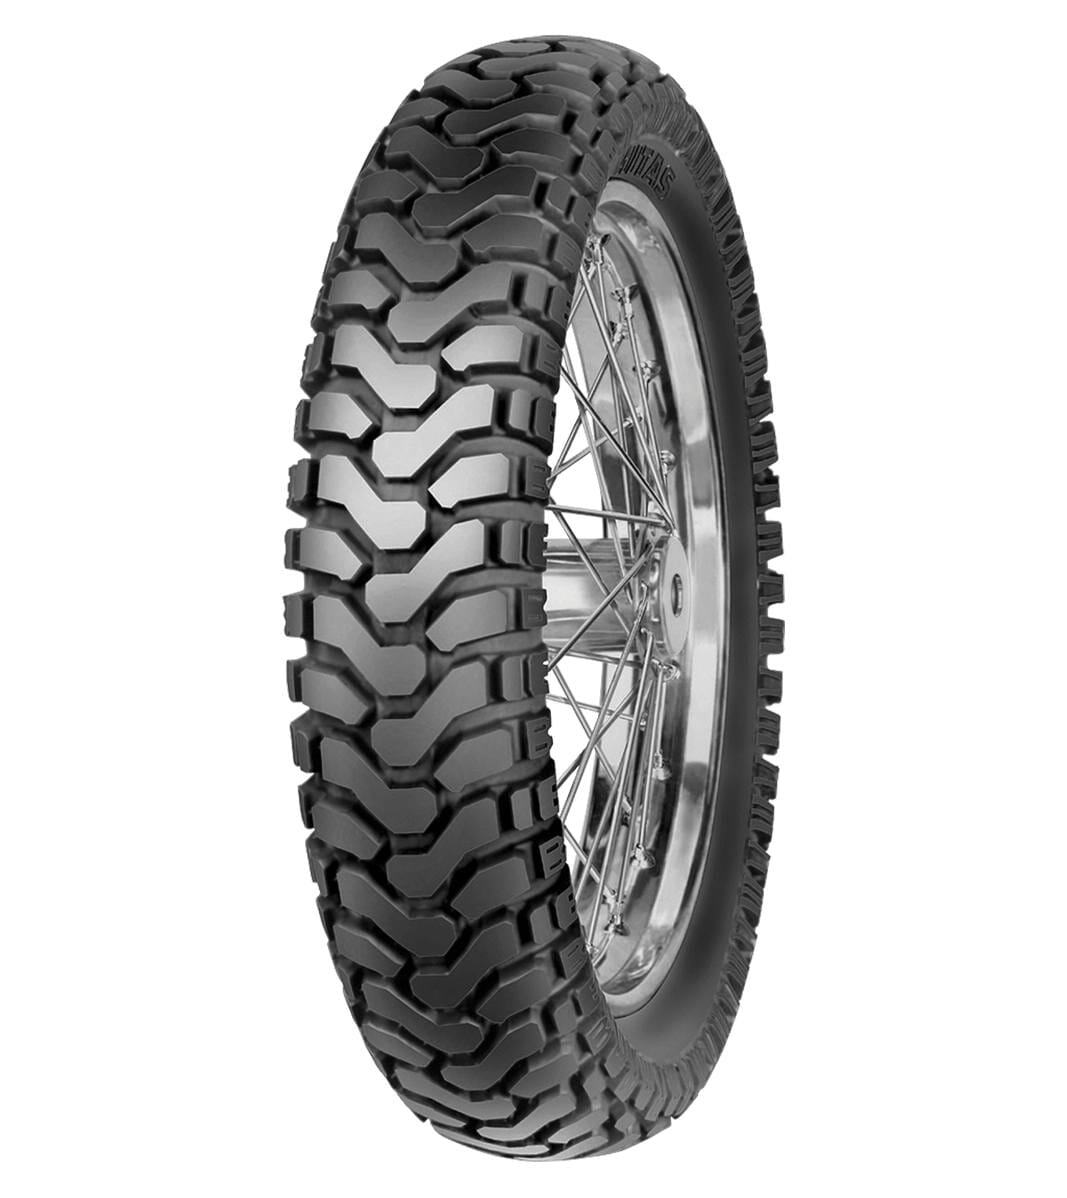 Mitas E-07 ENDURO 140/80-18 Trail OFF Trail 70T No Stripe Tubeless Rear Tire, 224427, 140/80-18, Adventure Touring, E Series, E-07 Enduro, Rear, Trail, Trail OFF, Tires - Imported and distributed in North & South America by Lindeco Genuine Powersports - Premier Powersports Equipment and Accessories for Motorcycle Enthusiasts, Professional Riders and Dealers.